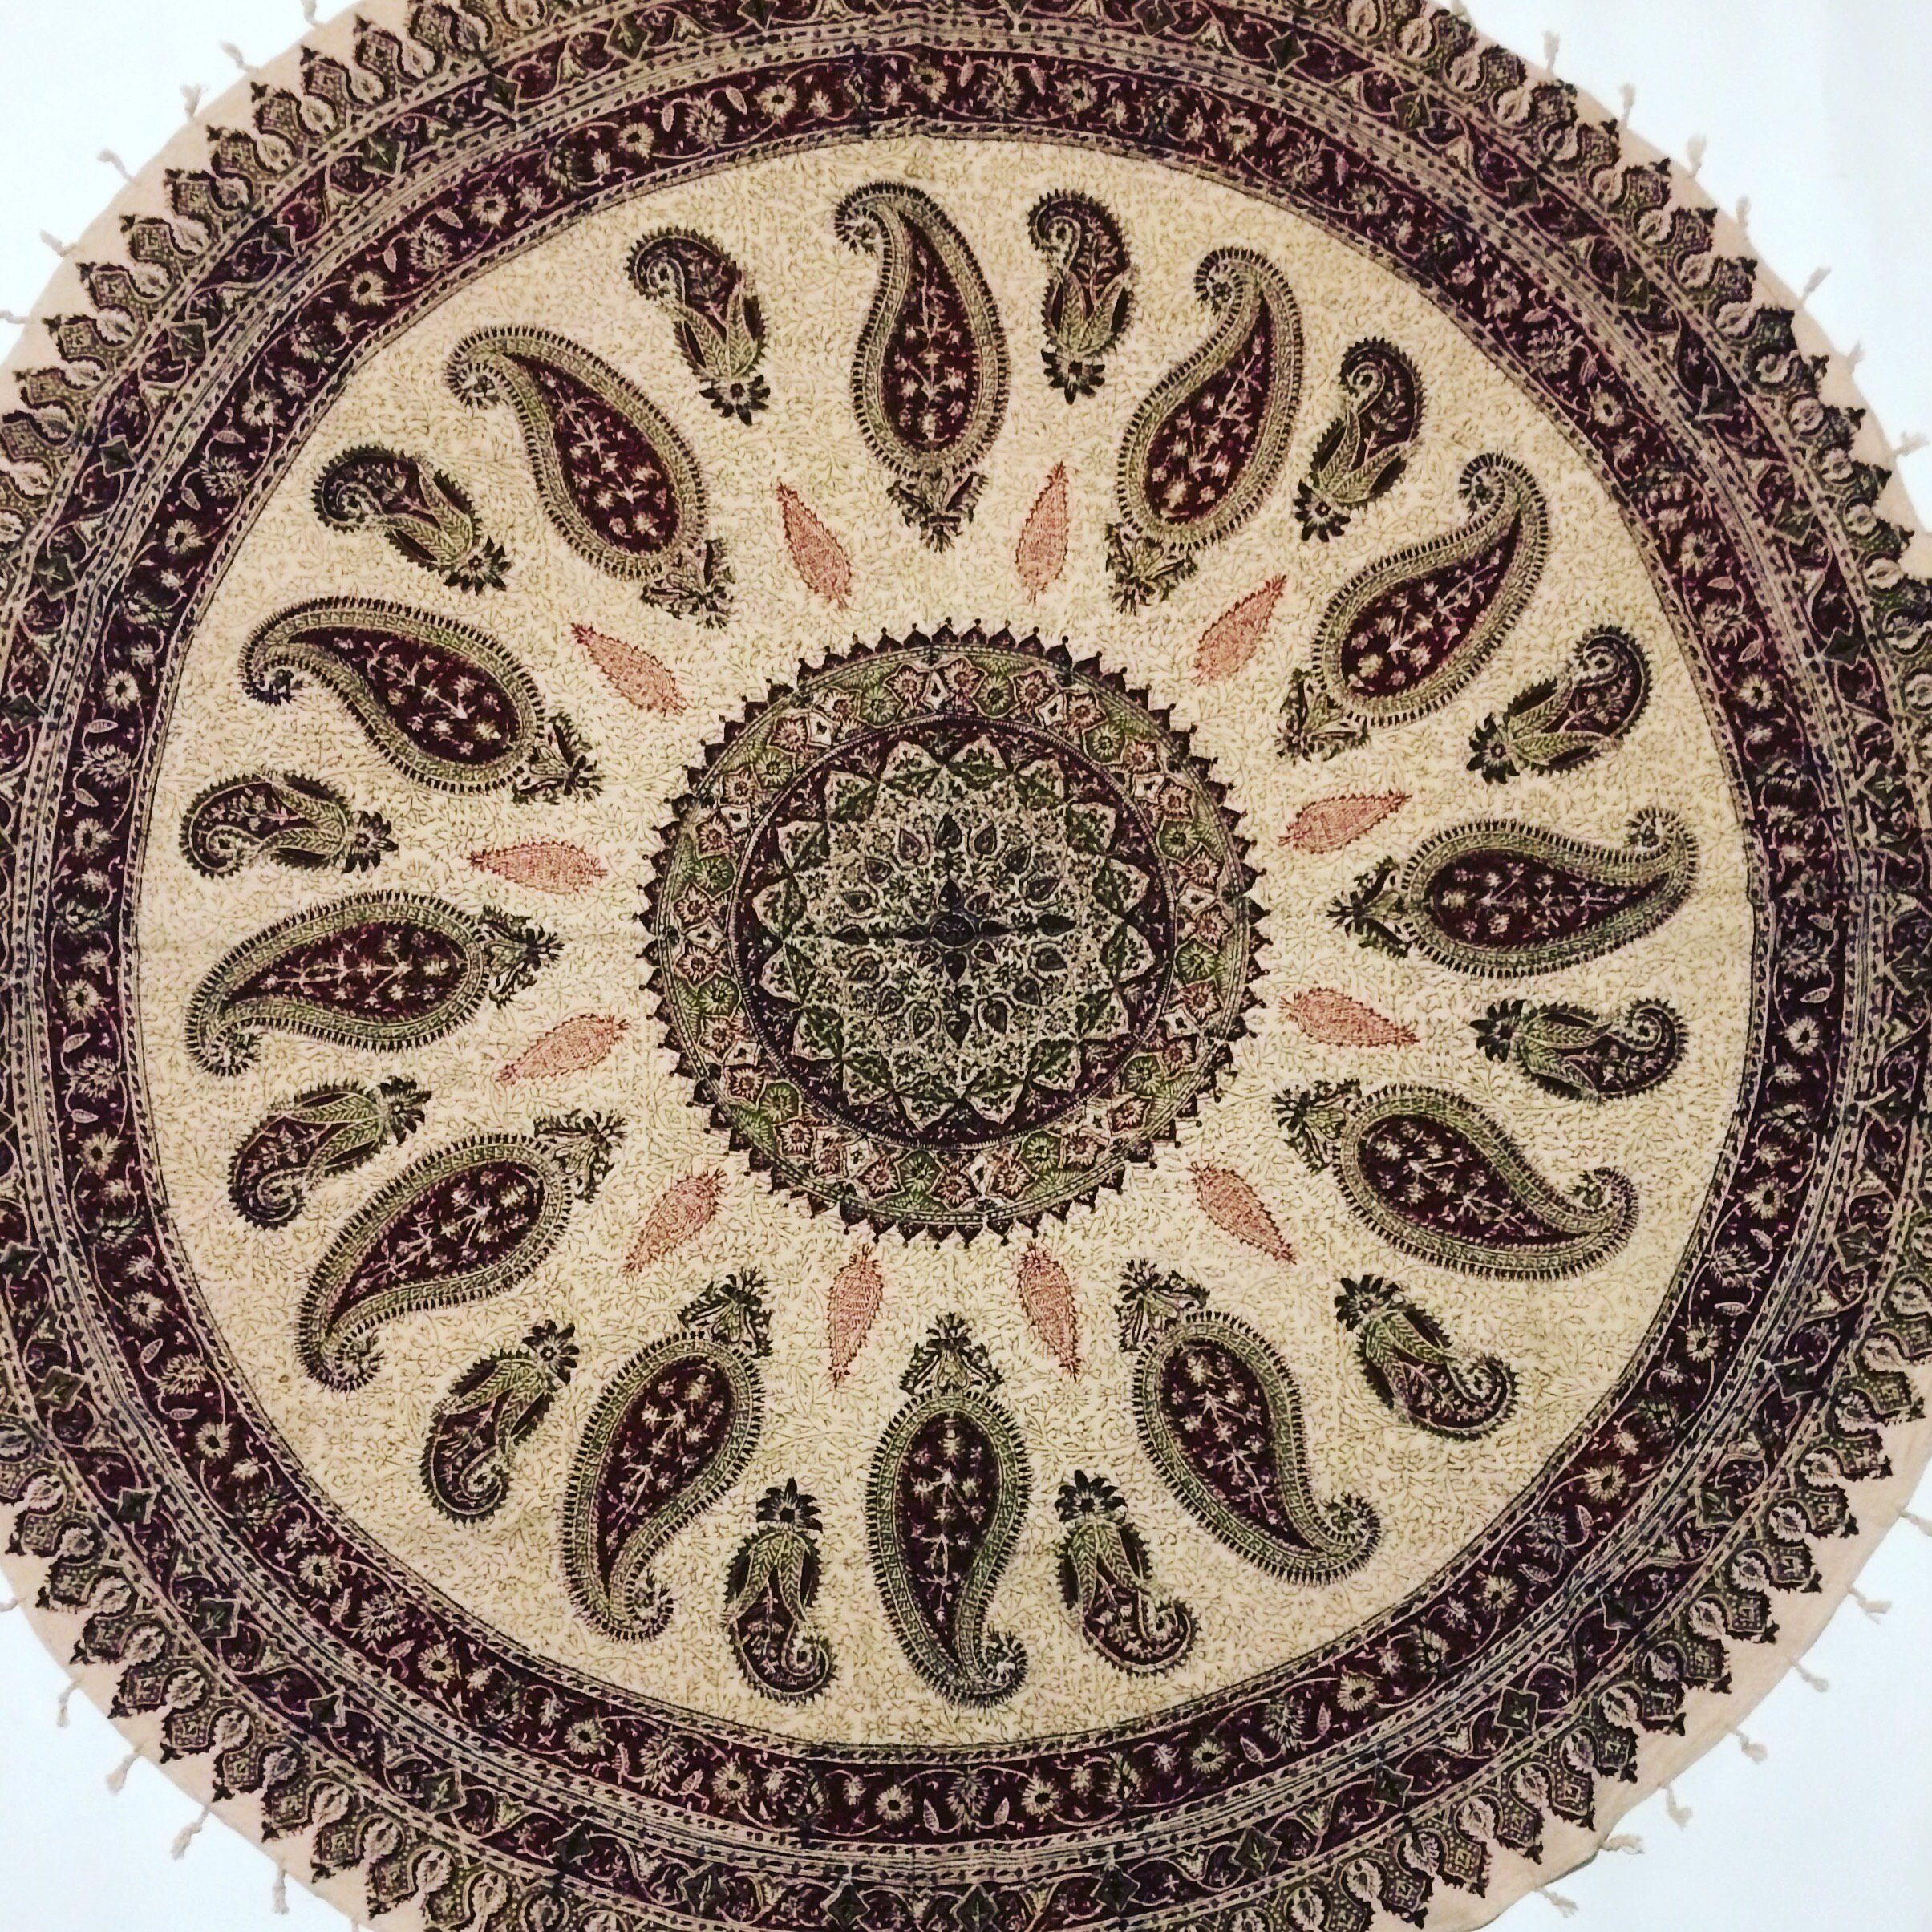 traditional inches round table cloth hand block printed cotton fullxfull tablecloth for inch accent tapestry natural dyes with tassels mandala pub height and chairs best furniture